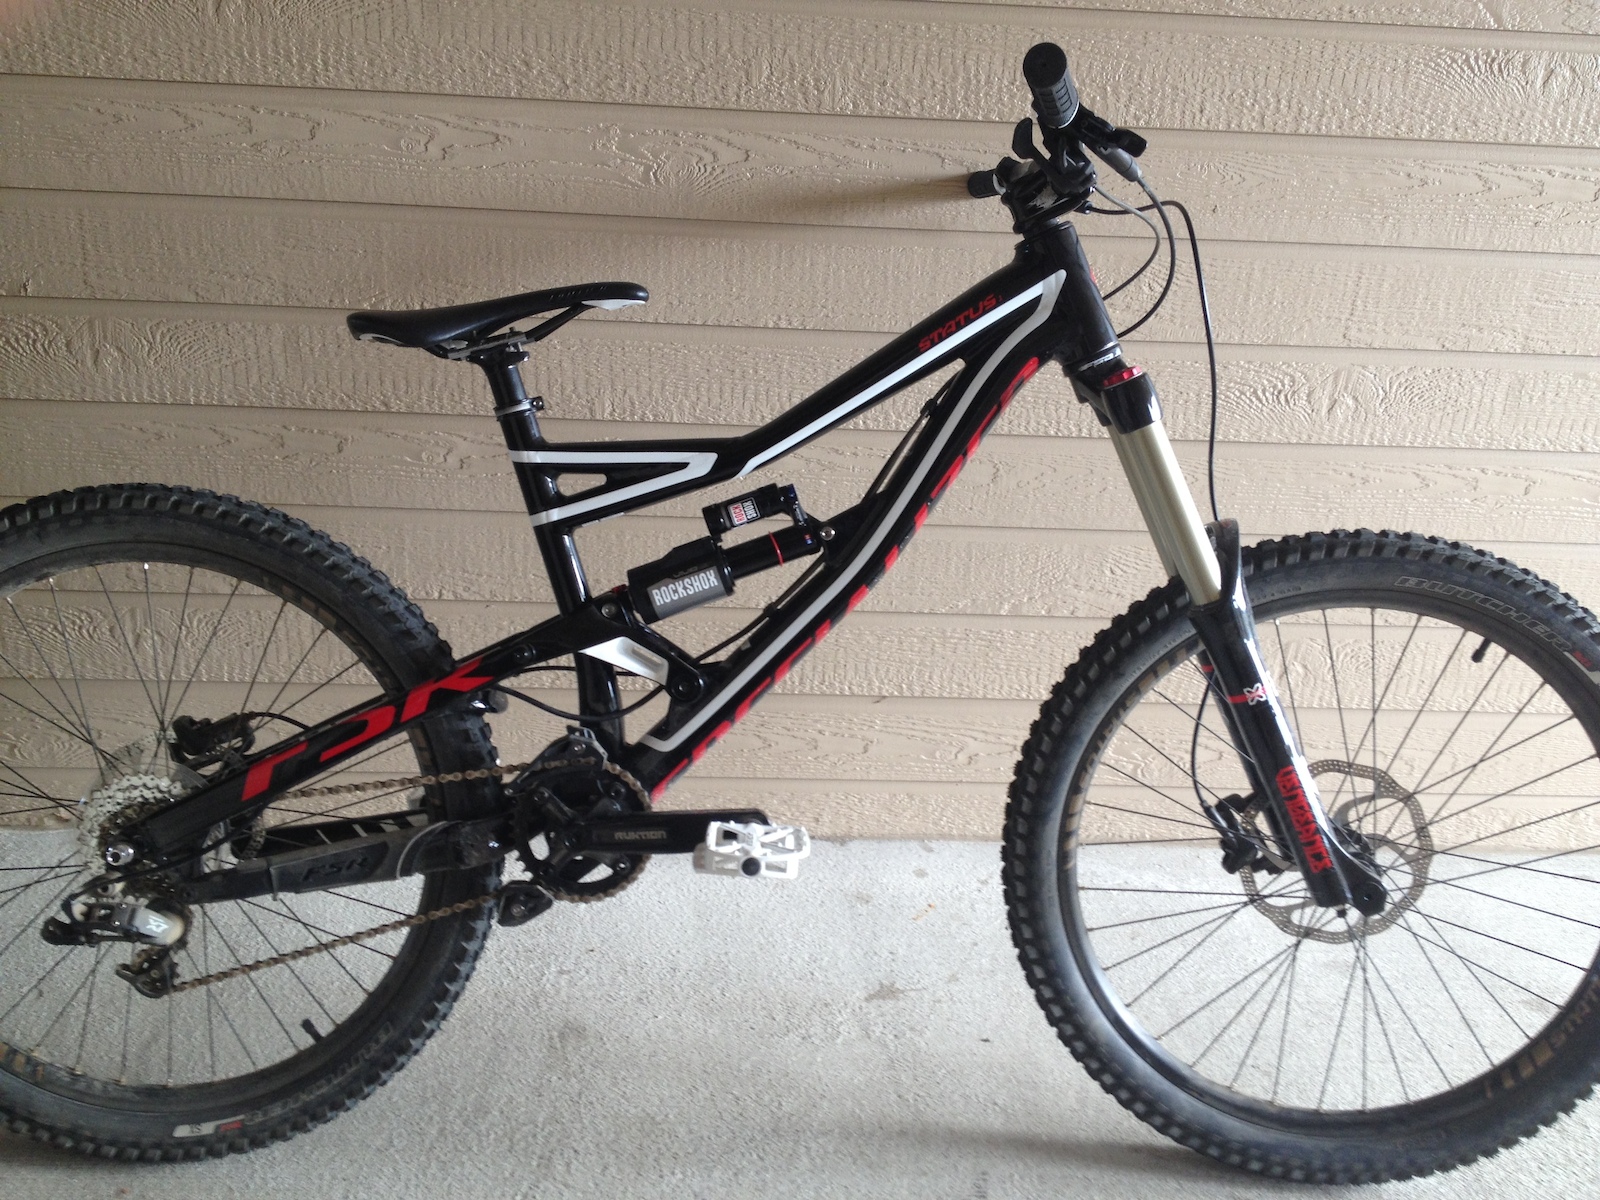 2013 Specialized Status medium 1 with new Vivid air shock